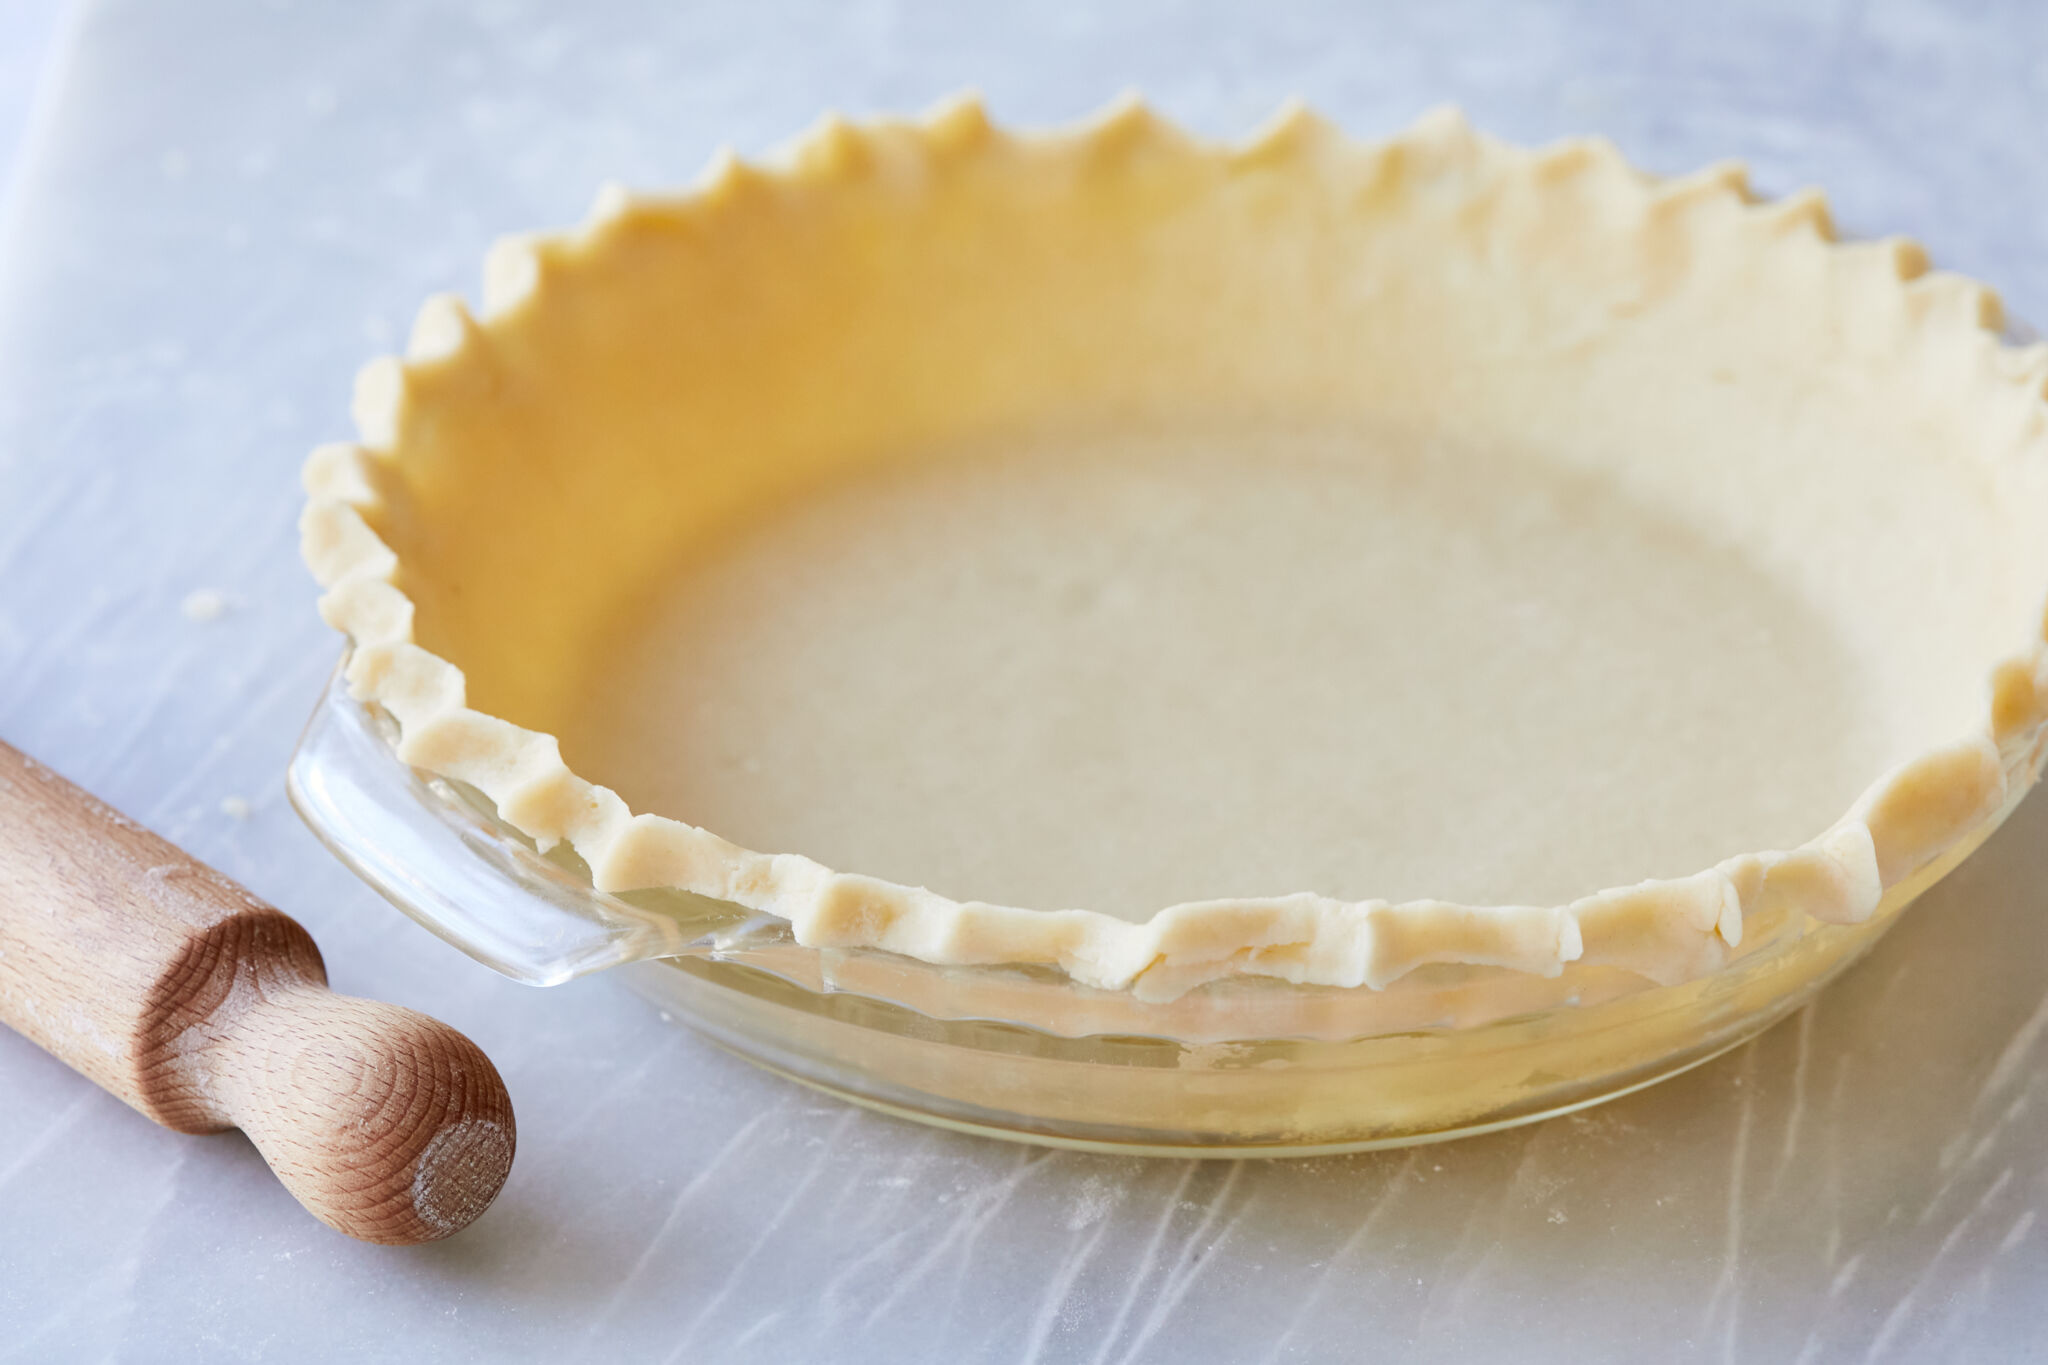 A Flaky Sour Cream Pie Crust is lined in a glass pie dish , with evenly crimped edges. A wood rolling pin is placed next to the pie crust in the left bottom corner of the image.